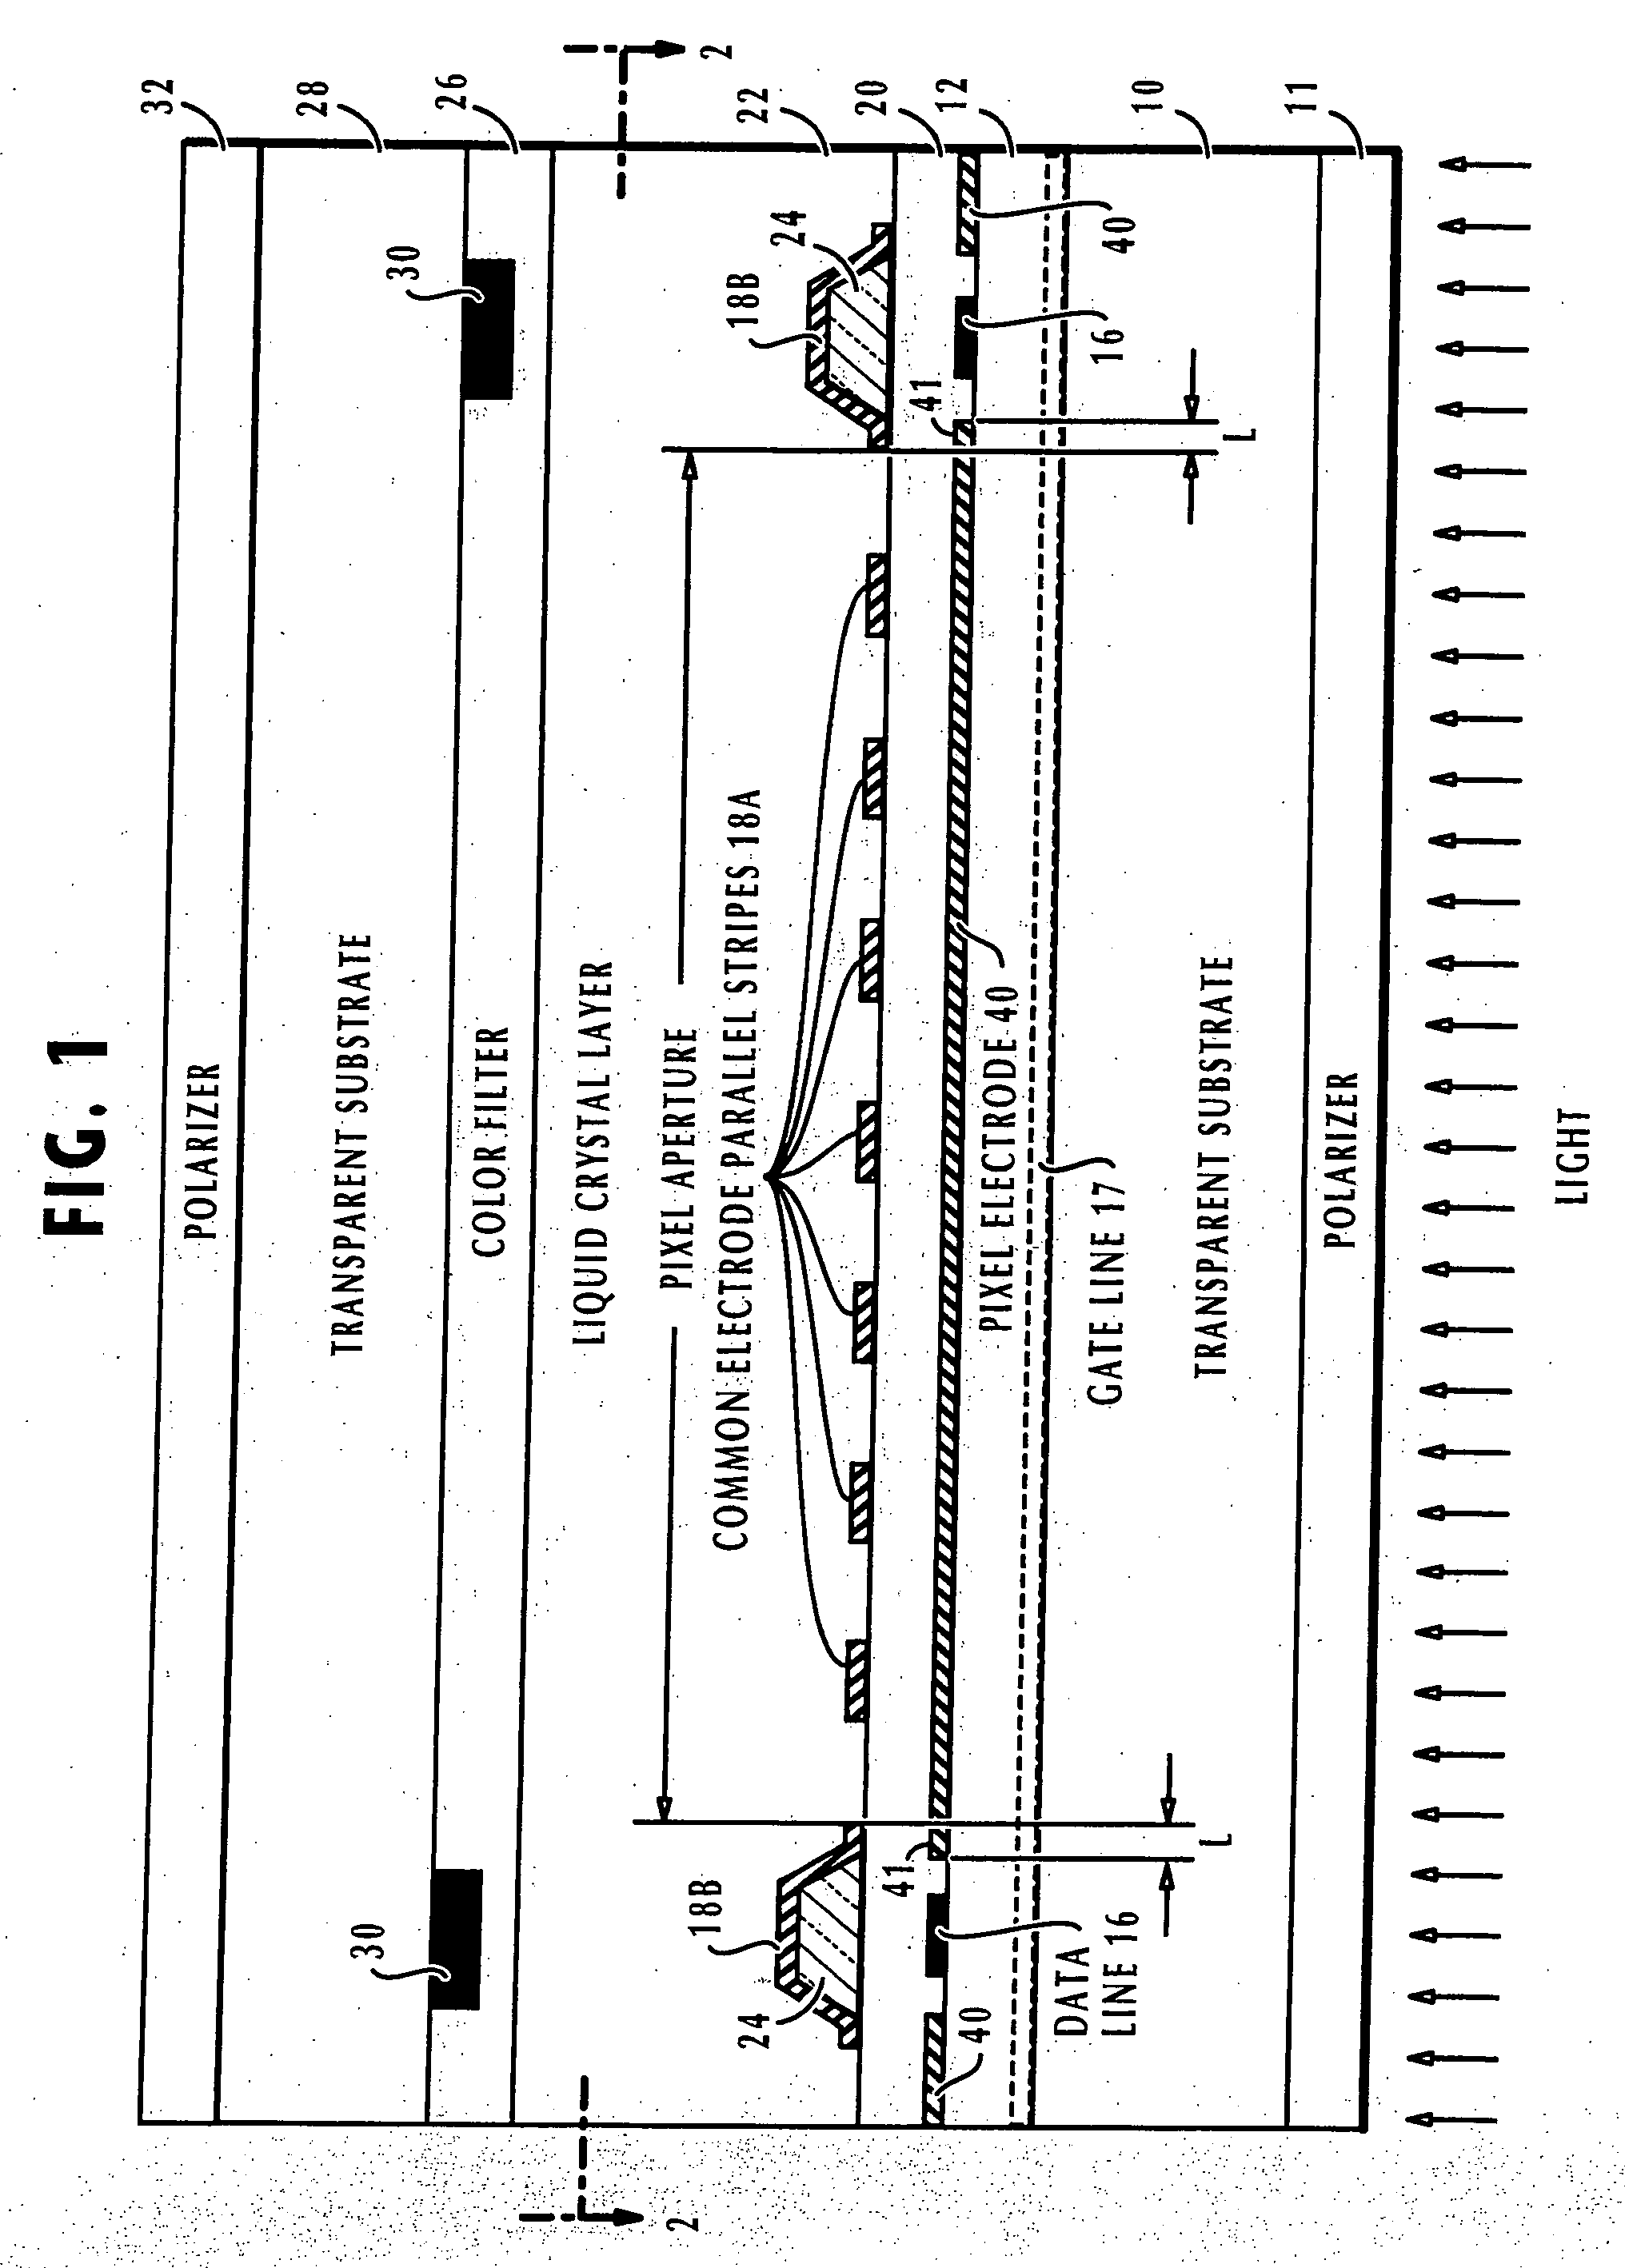 High aperture ratio in-plane switching mode active matrix liquid crystal display unit